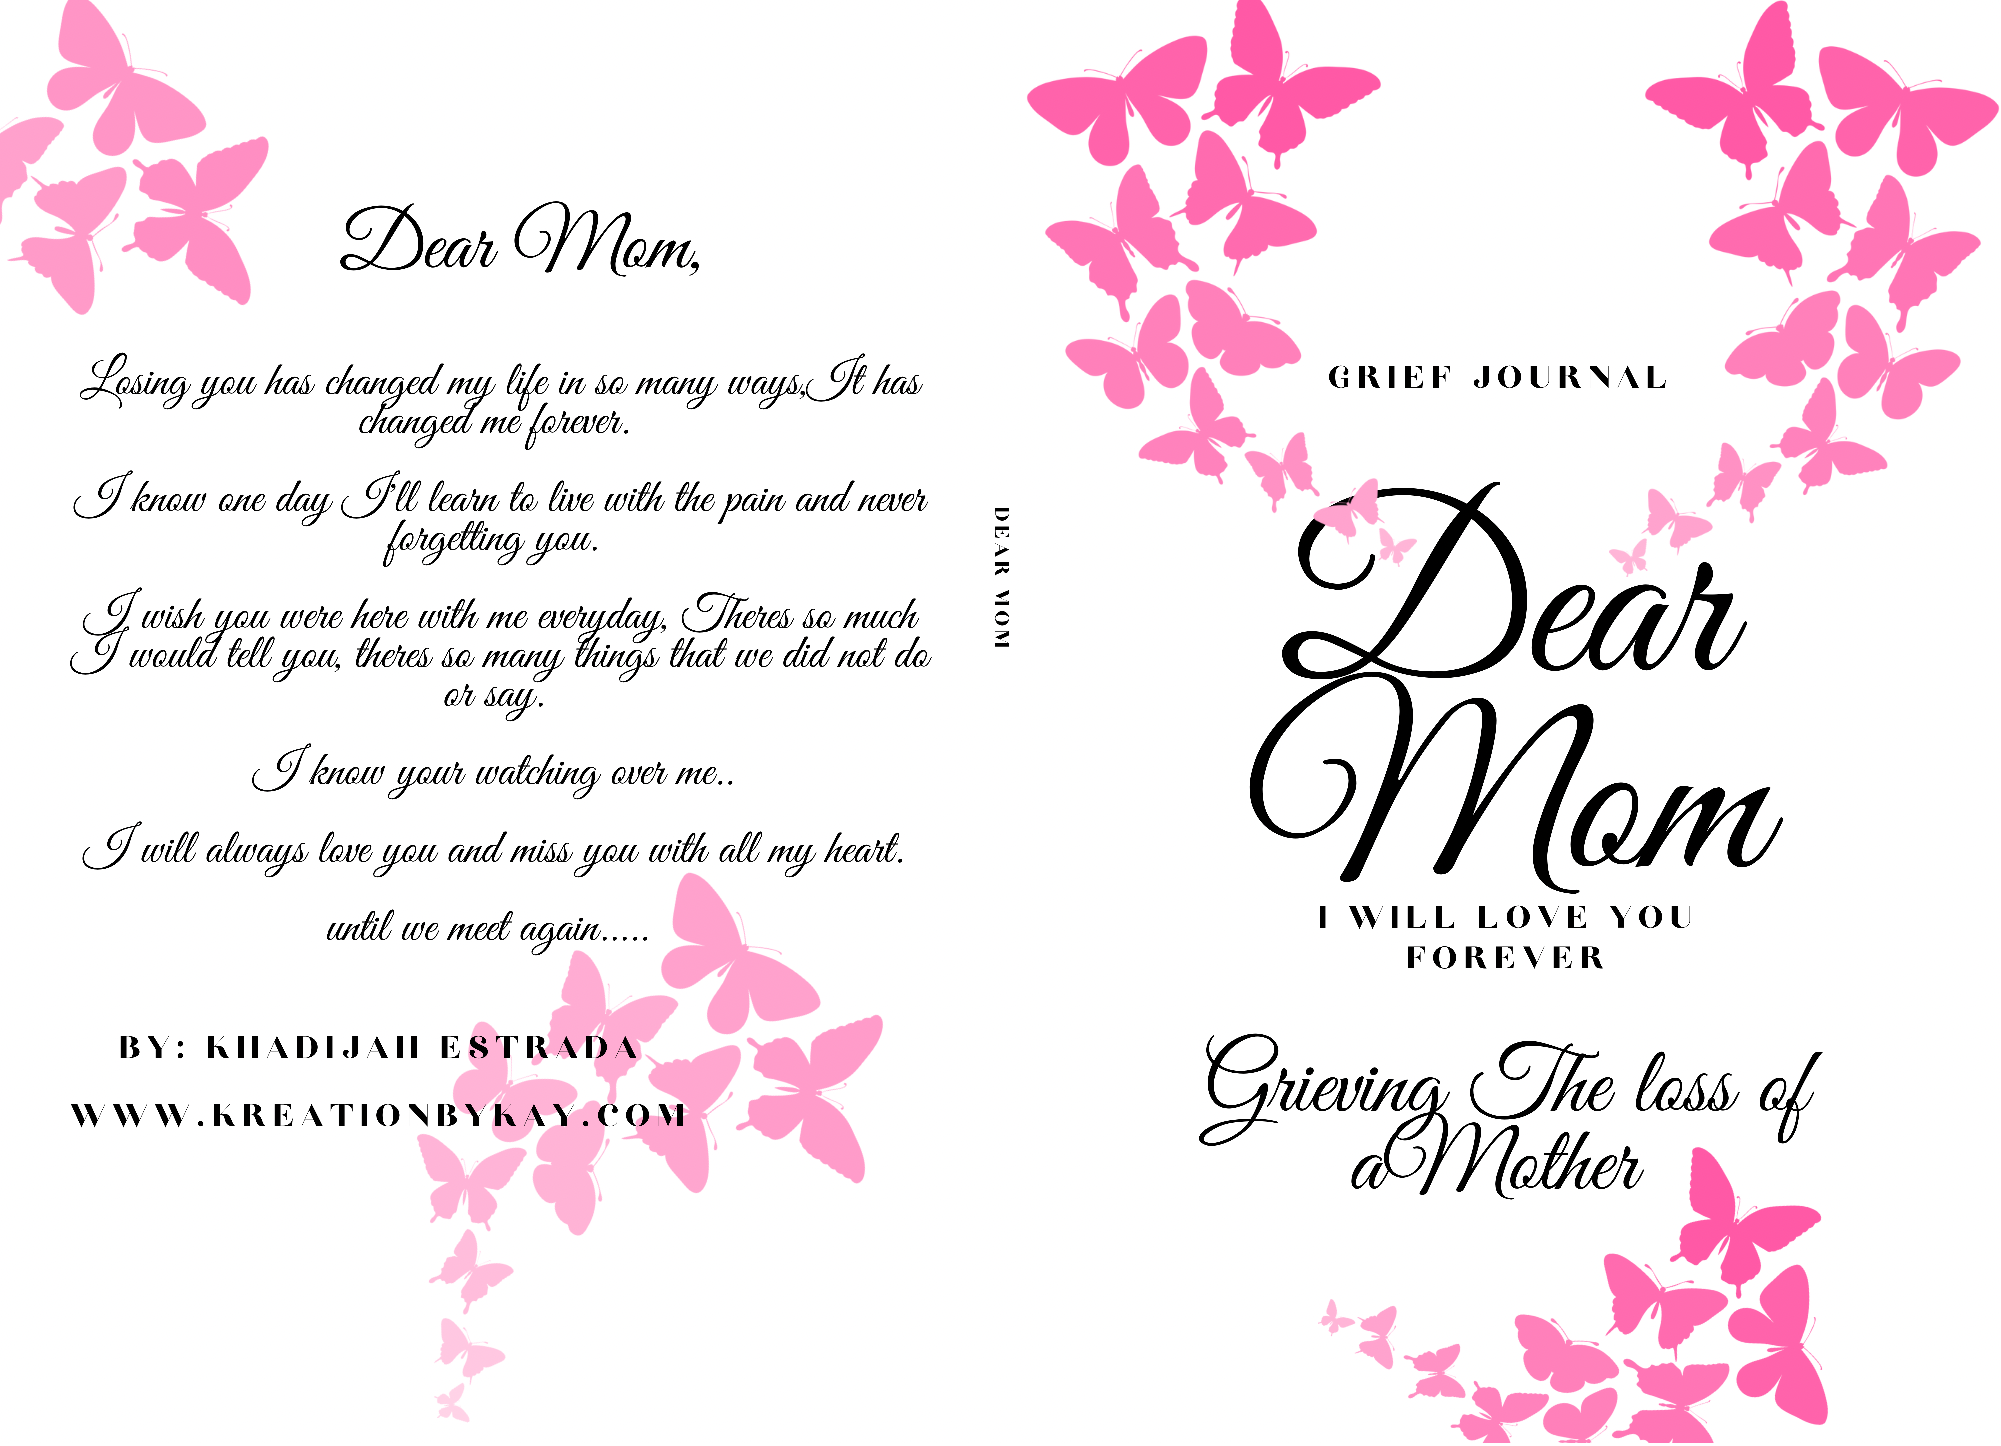 “Dear Mom” Grieving The Loss Of A Mother